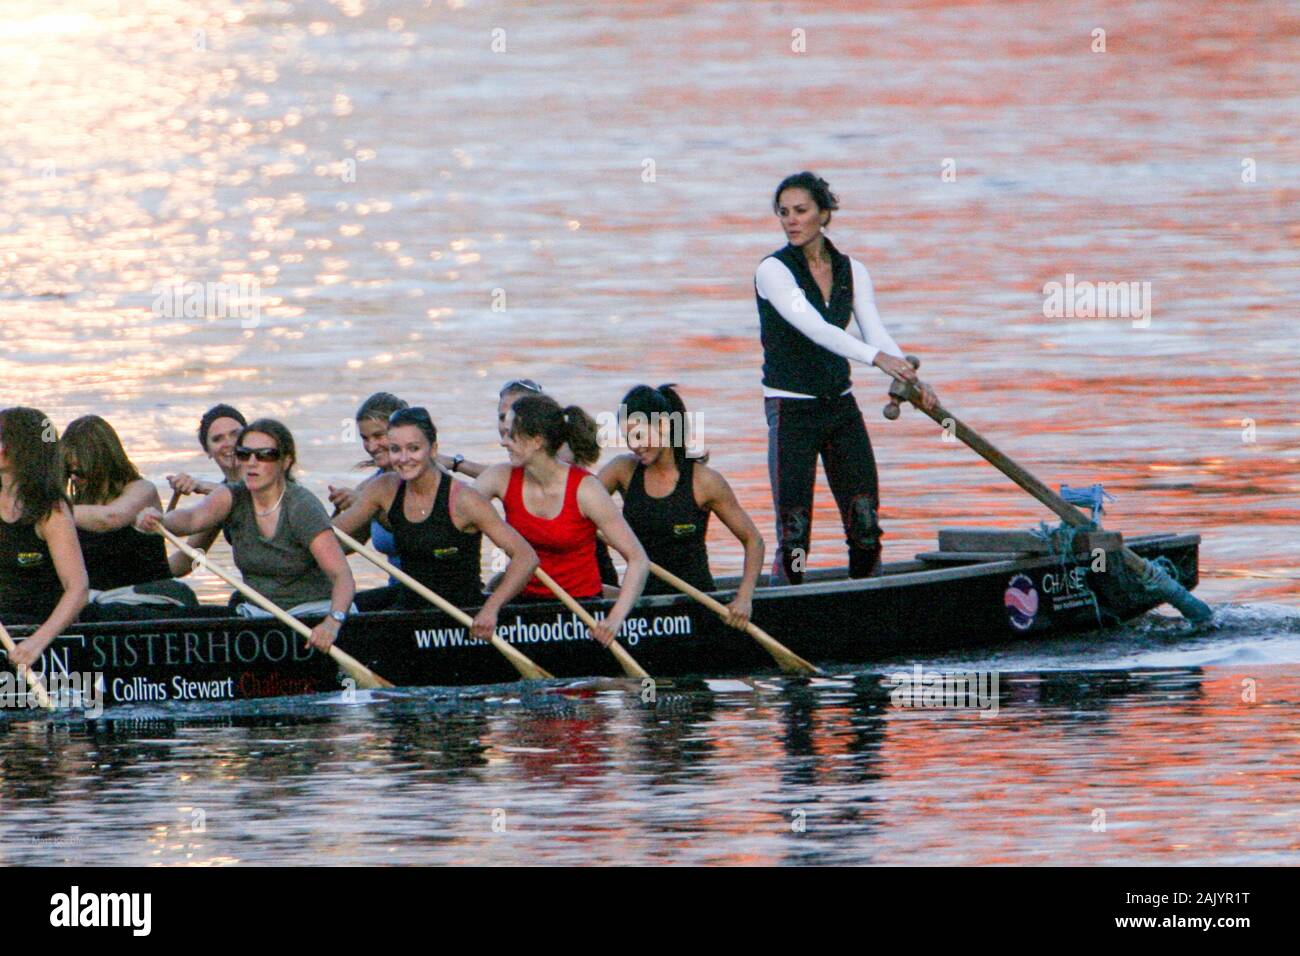 Kate Middleton, before she was The Duchess of Cambridge, training on board a dragon boat, in London, UK 2007. Kate made her now infamous appearance in the boat in 2007 following a brief split from William as the Sisterhood prepared for a cross-Channel race in the traditional Chinese vessel against all-boys crew the Brotherhood Stock Photo